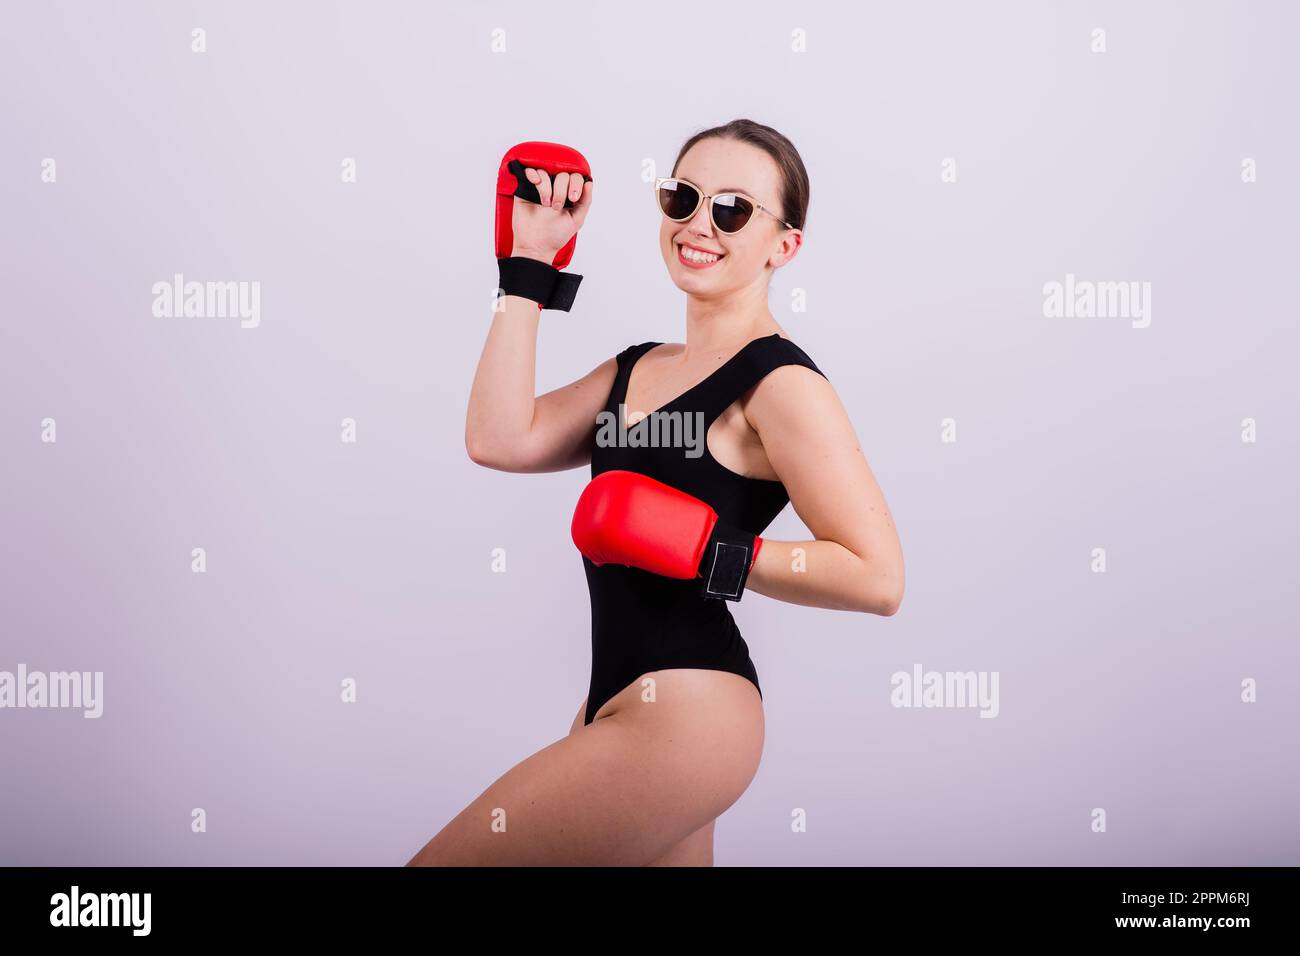 Studio portrait of a boxer female in bodysuit with gloves Stock Photo